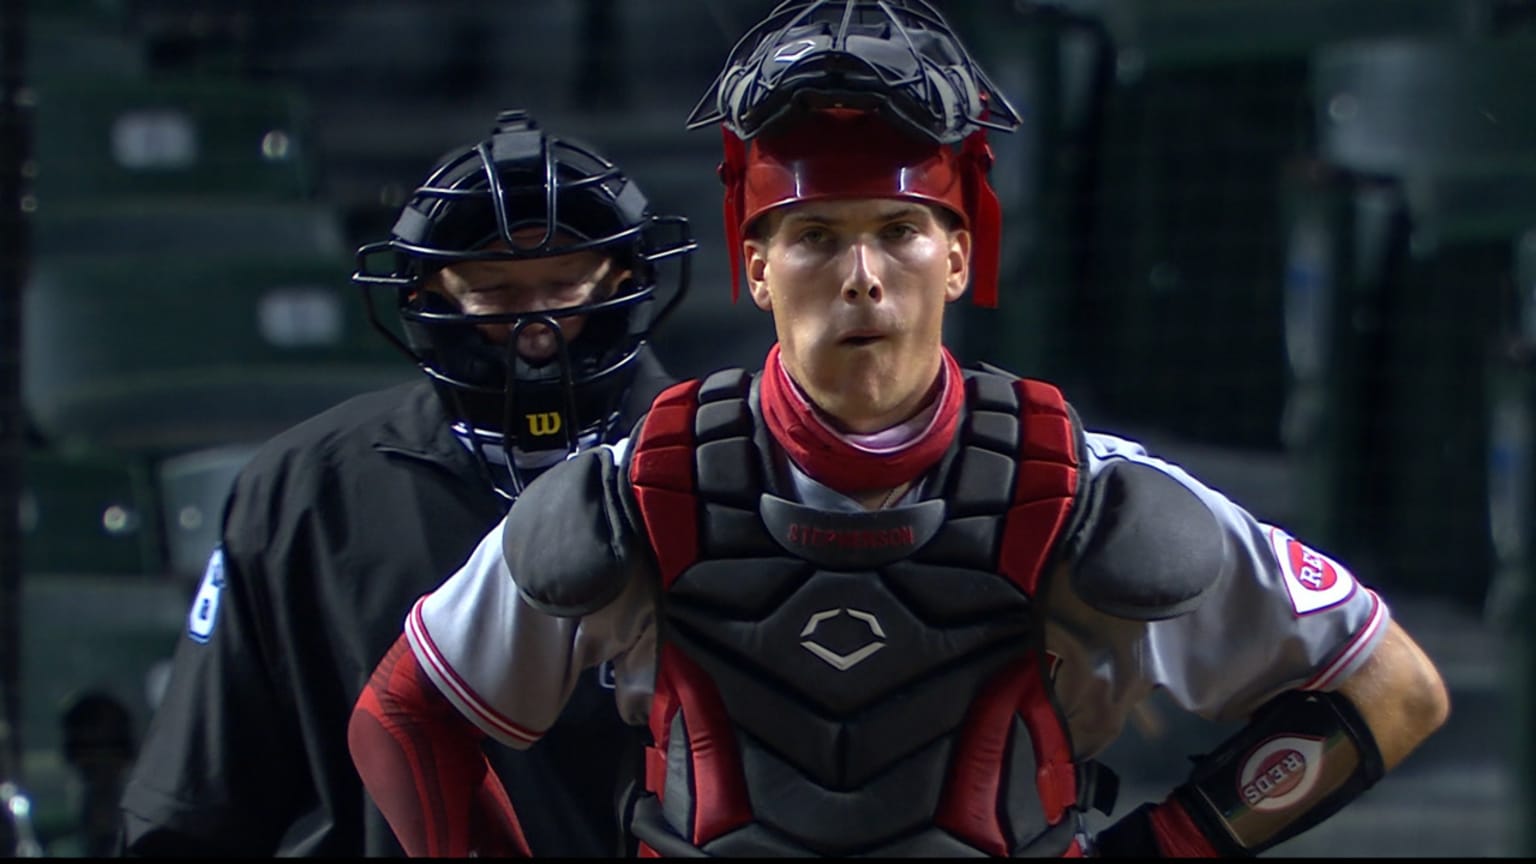 Tyler Stephenson - MLB Catcher - News, Stats, Bio and more - The